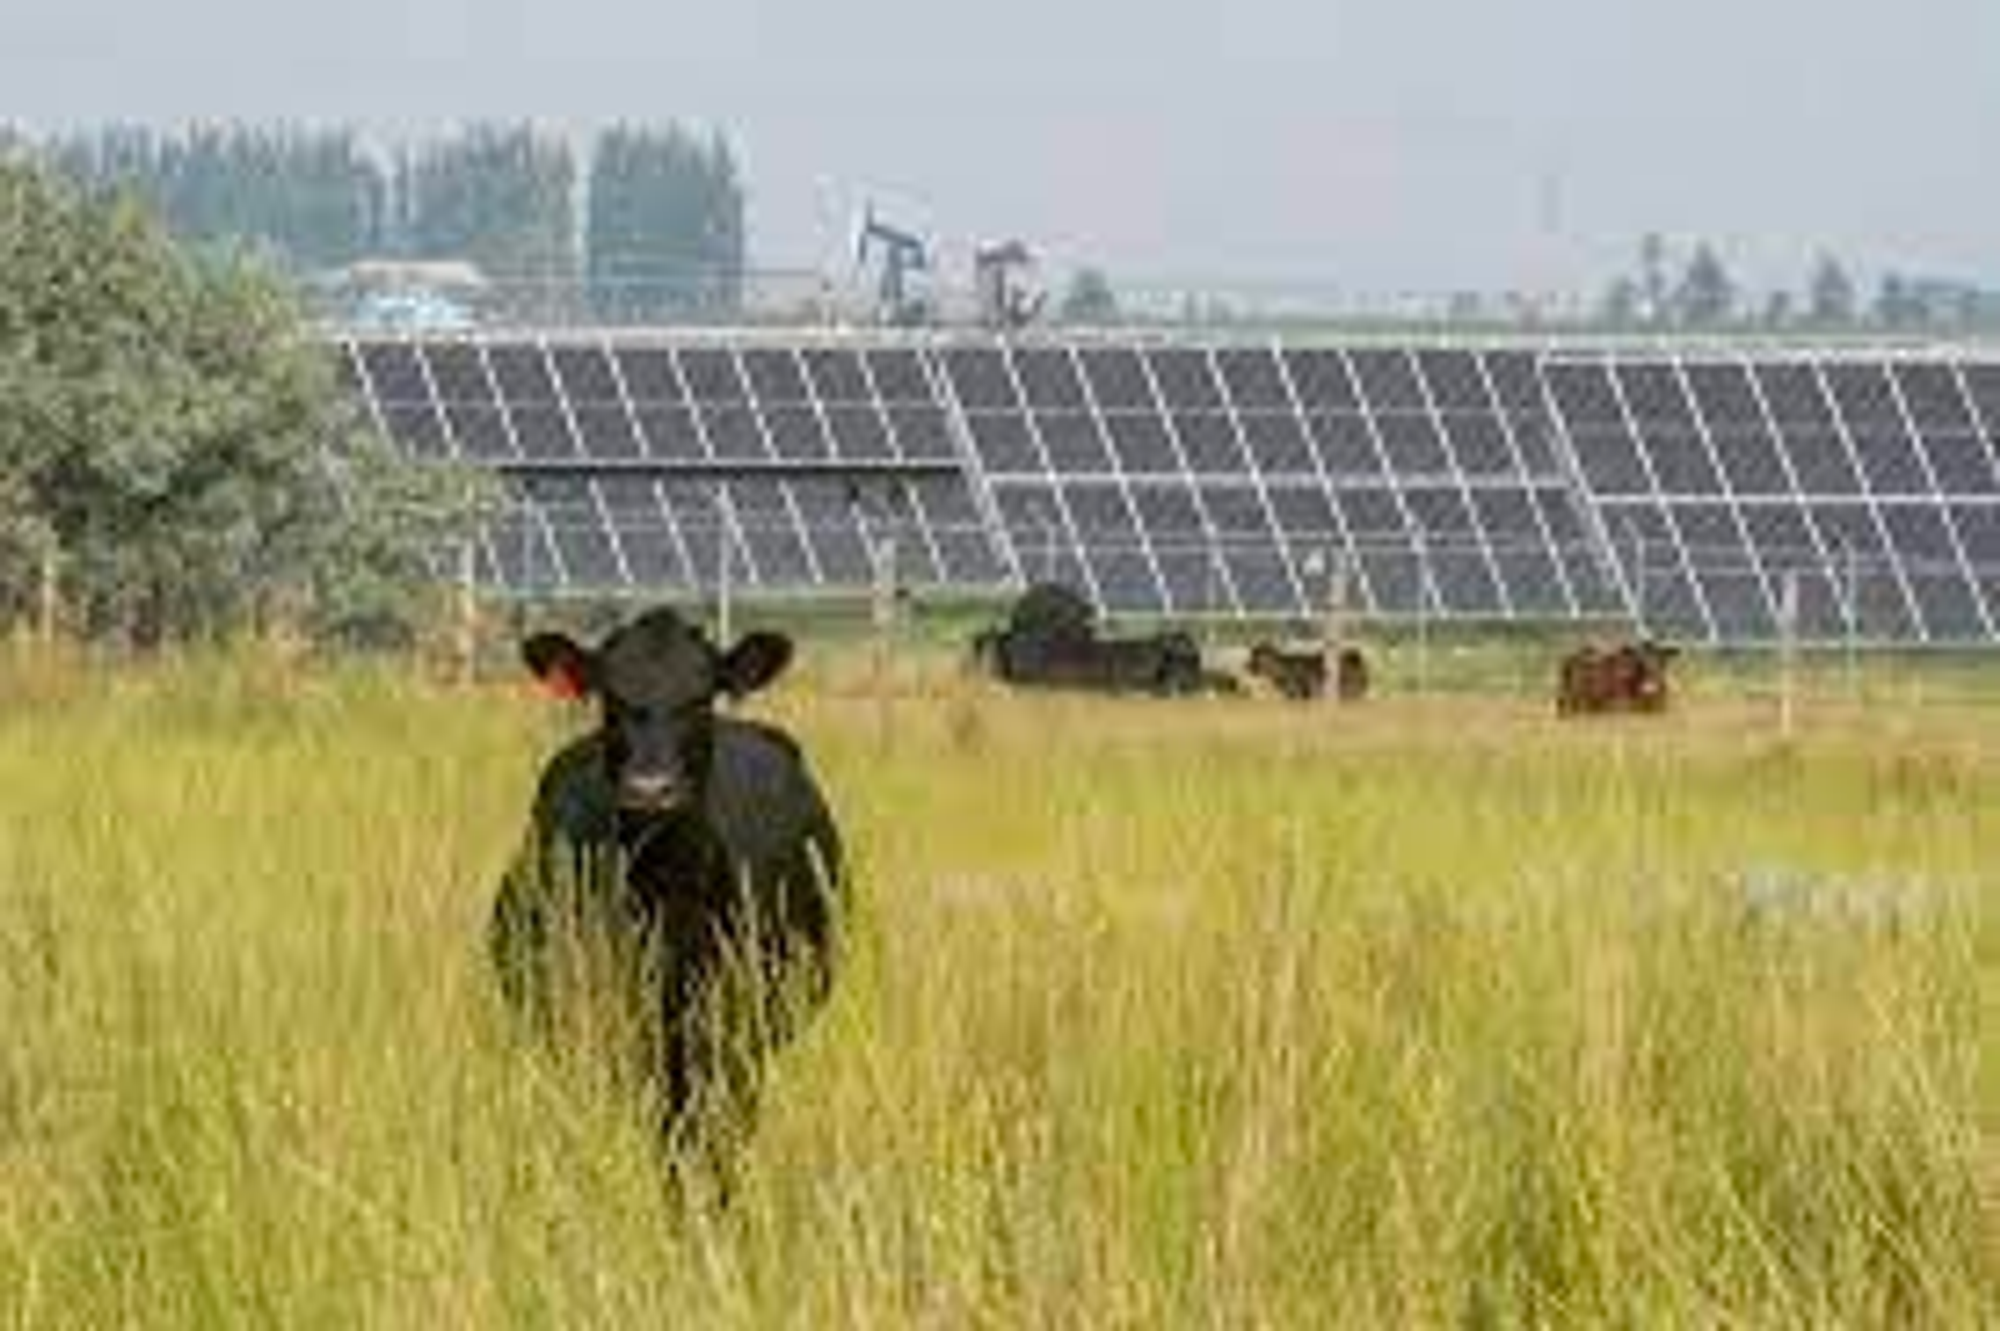 Alberta solar projects raise tensions over agricultural land use